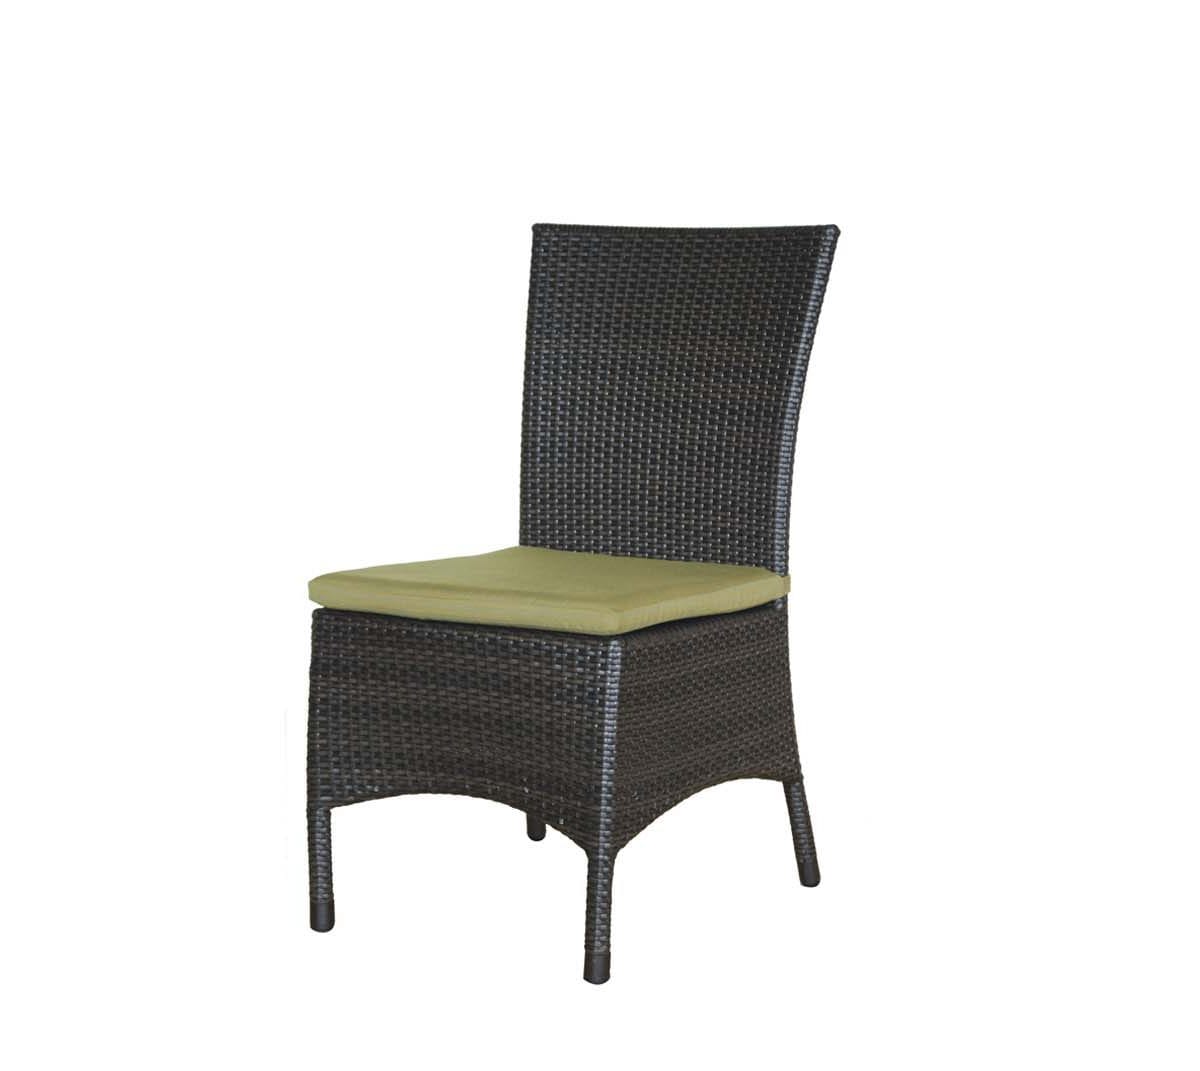 Ratana Side Chairs Palm Harbor Dining Side Chair